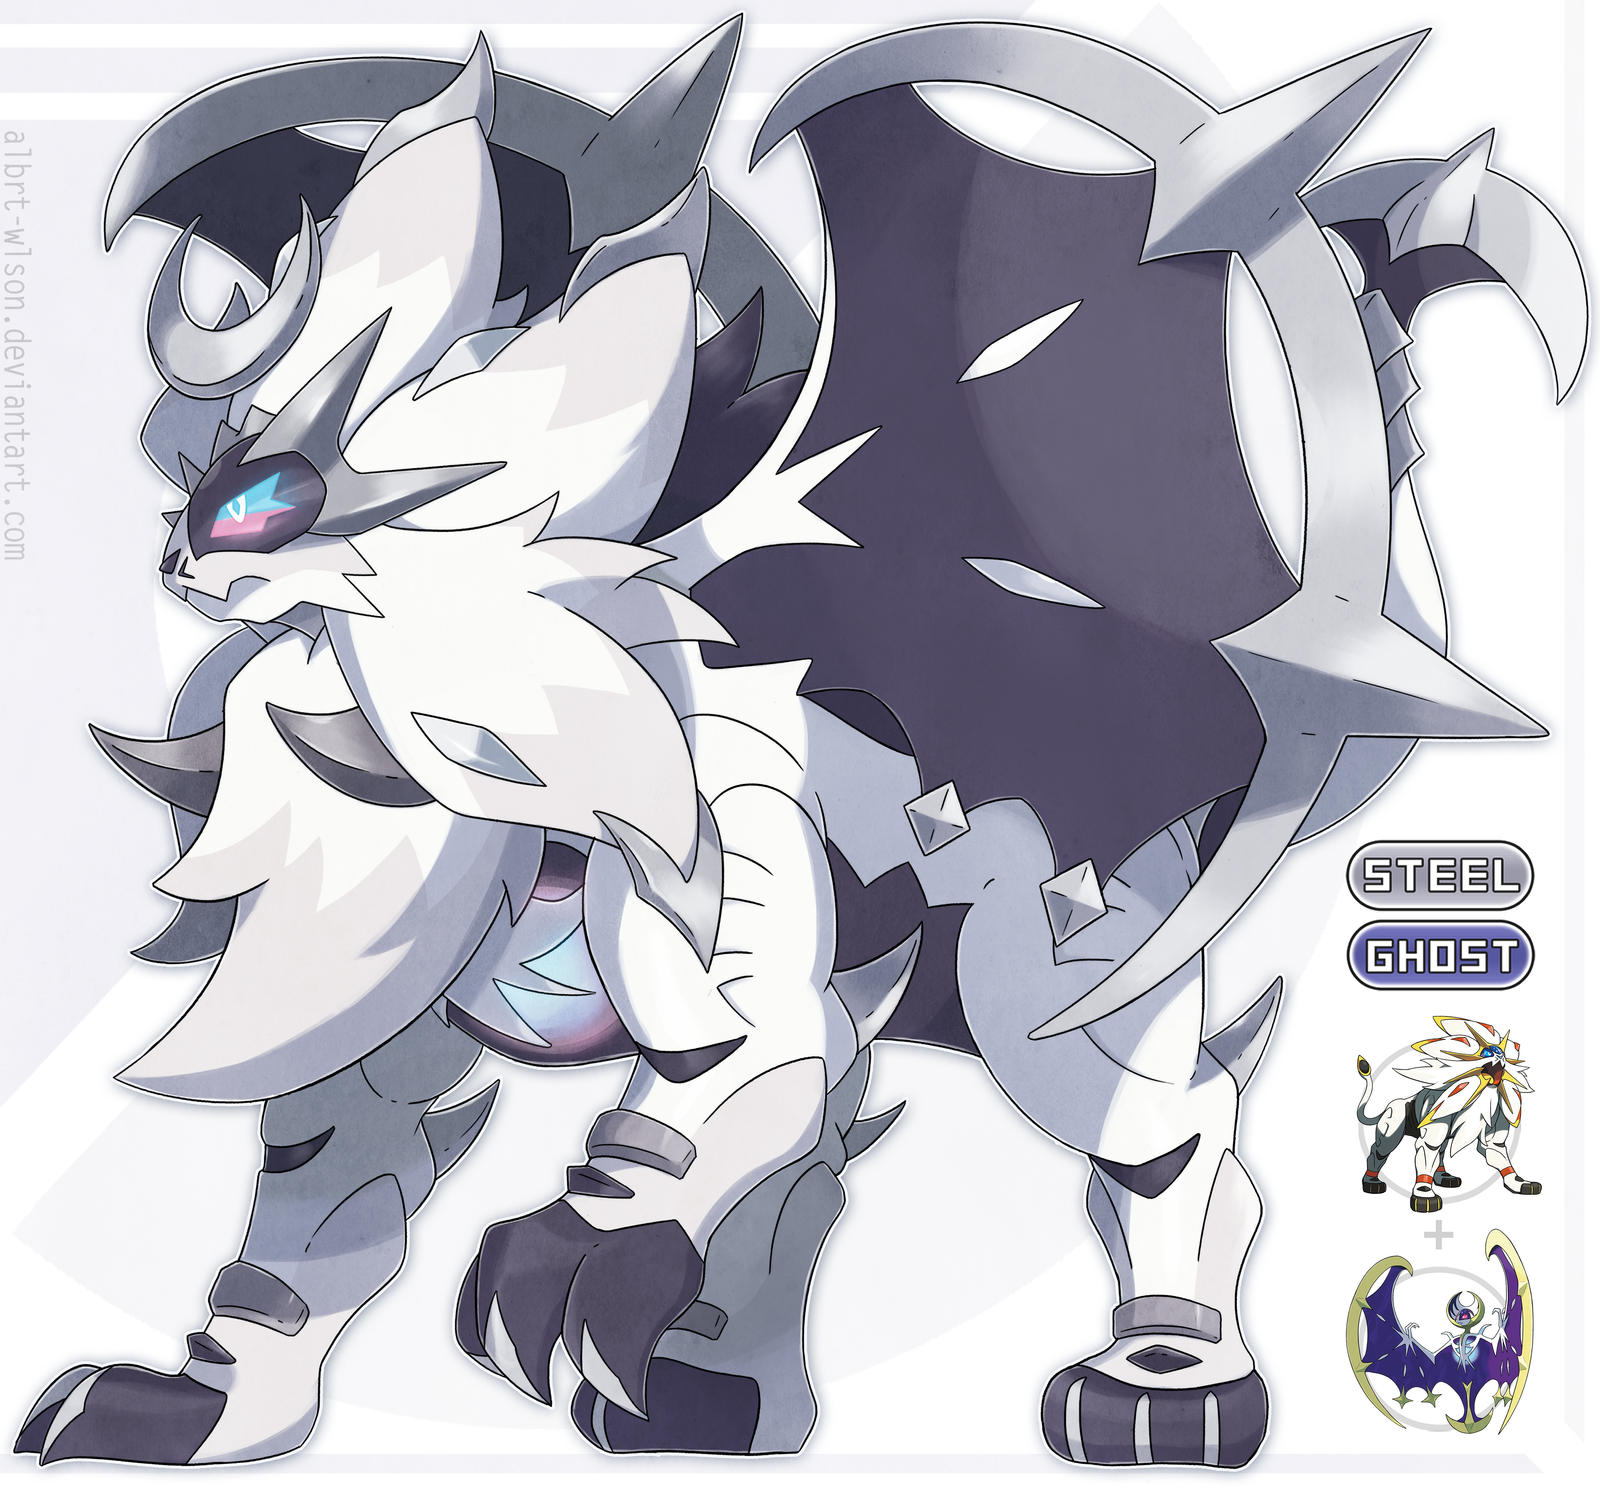 Solgaleo and Lunala fusion by MosasaurWorks on DeviantArt